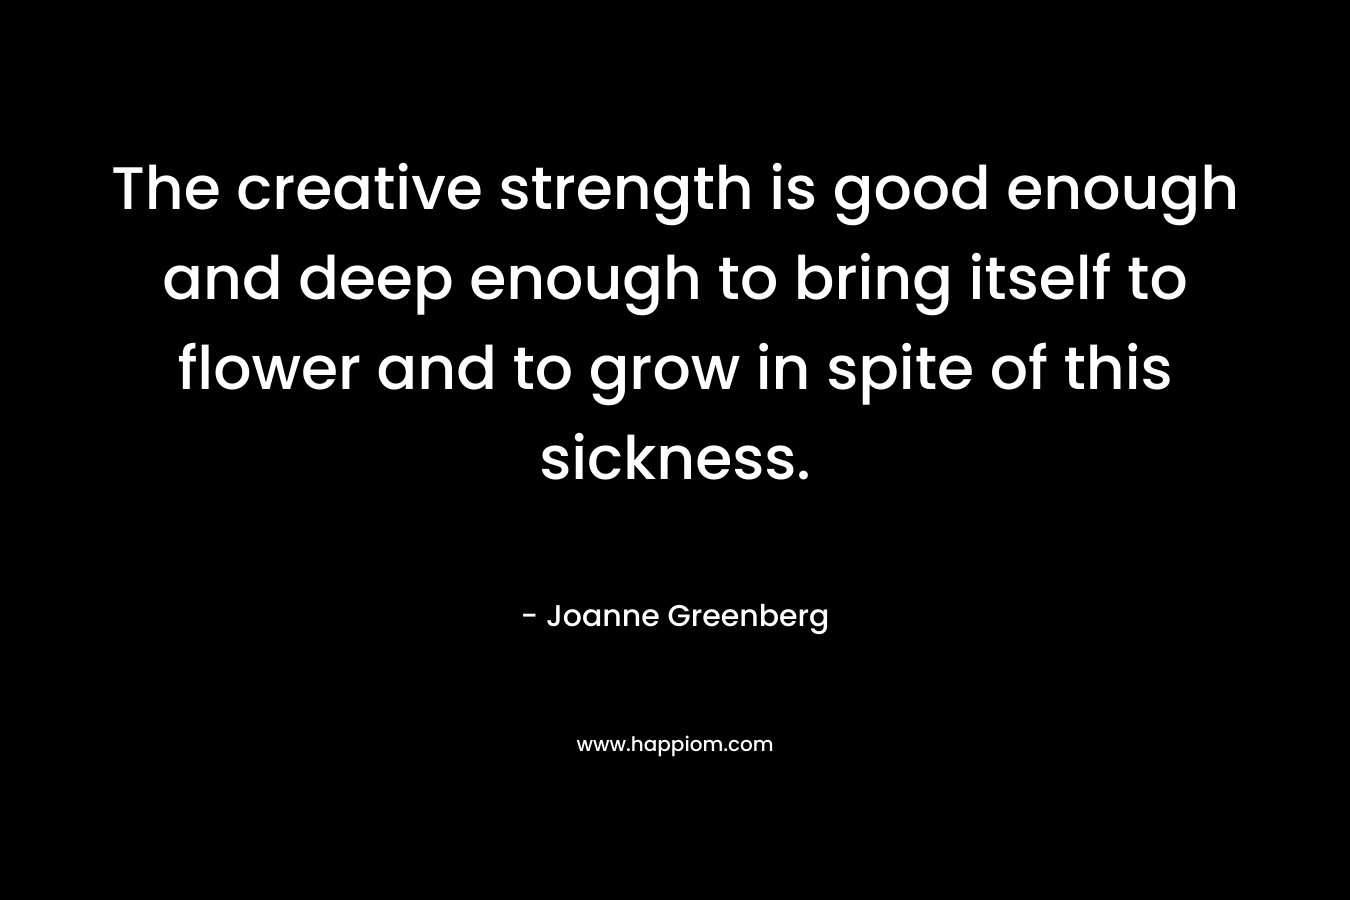 The creative strength is good enough and deep enough to bring itself to flower and to grow in spite of this sickness.